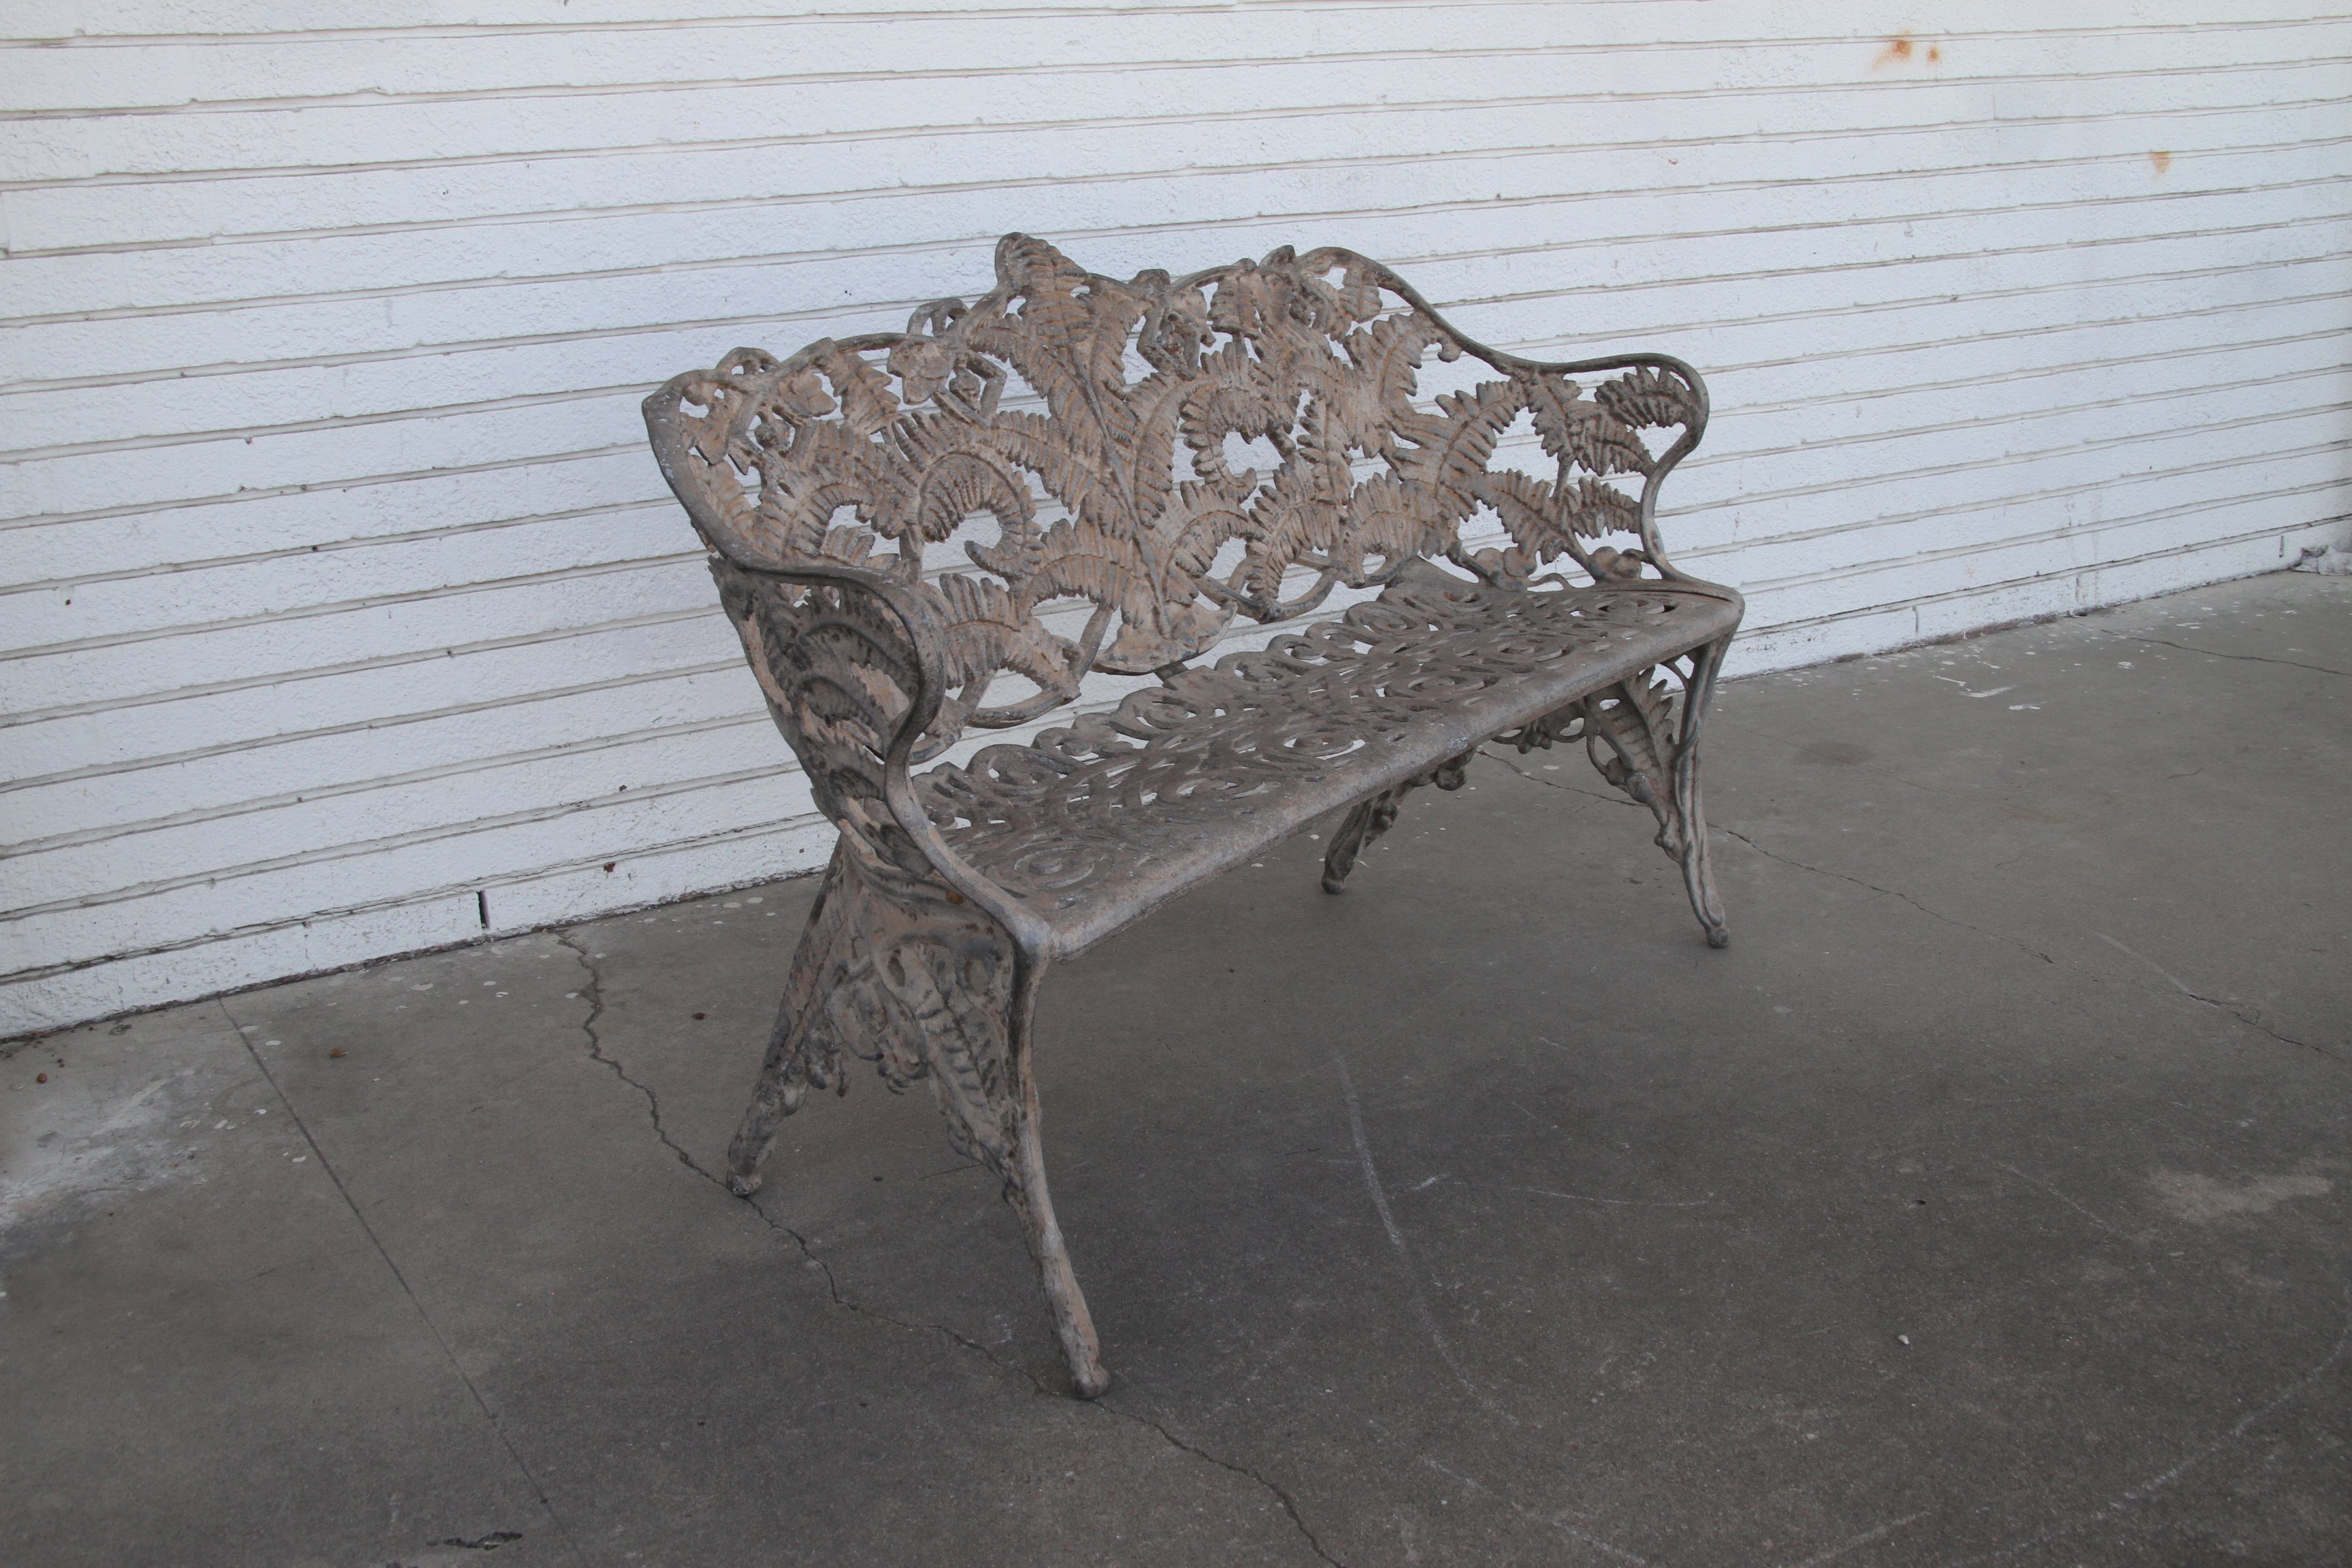 Antique cast iron patio settee.

An Antique cast iron garden bench from the early 20th century.
Scroll design on the seat and the back that features a fern motif.

We also have a matching arm chair in last photo.